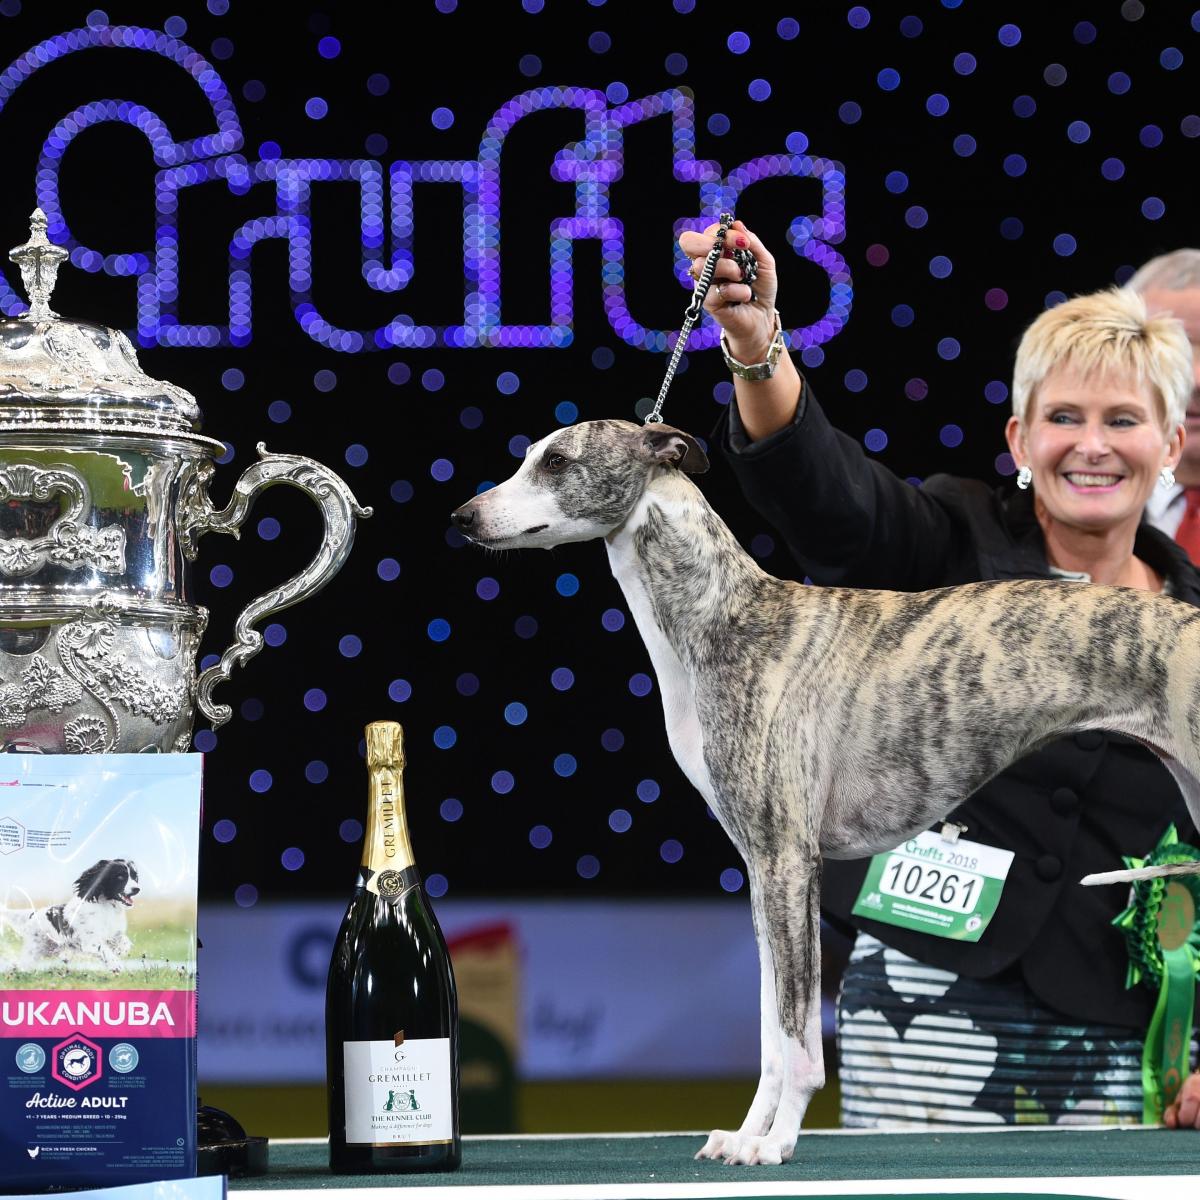 Crufts Dog Show Results 2018: Sunday Winners, Top Photos and Reaction | Bleacher ...1200 x 1200